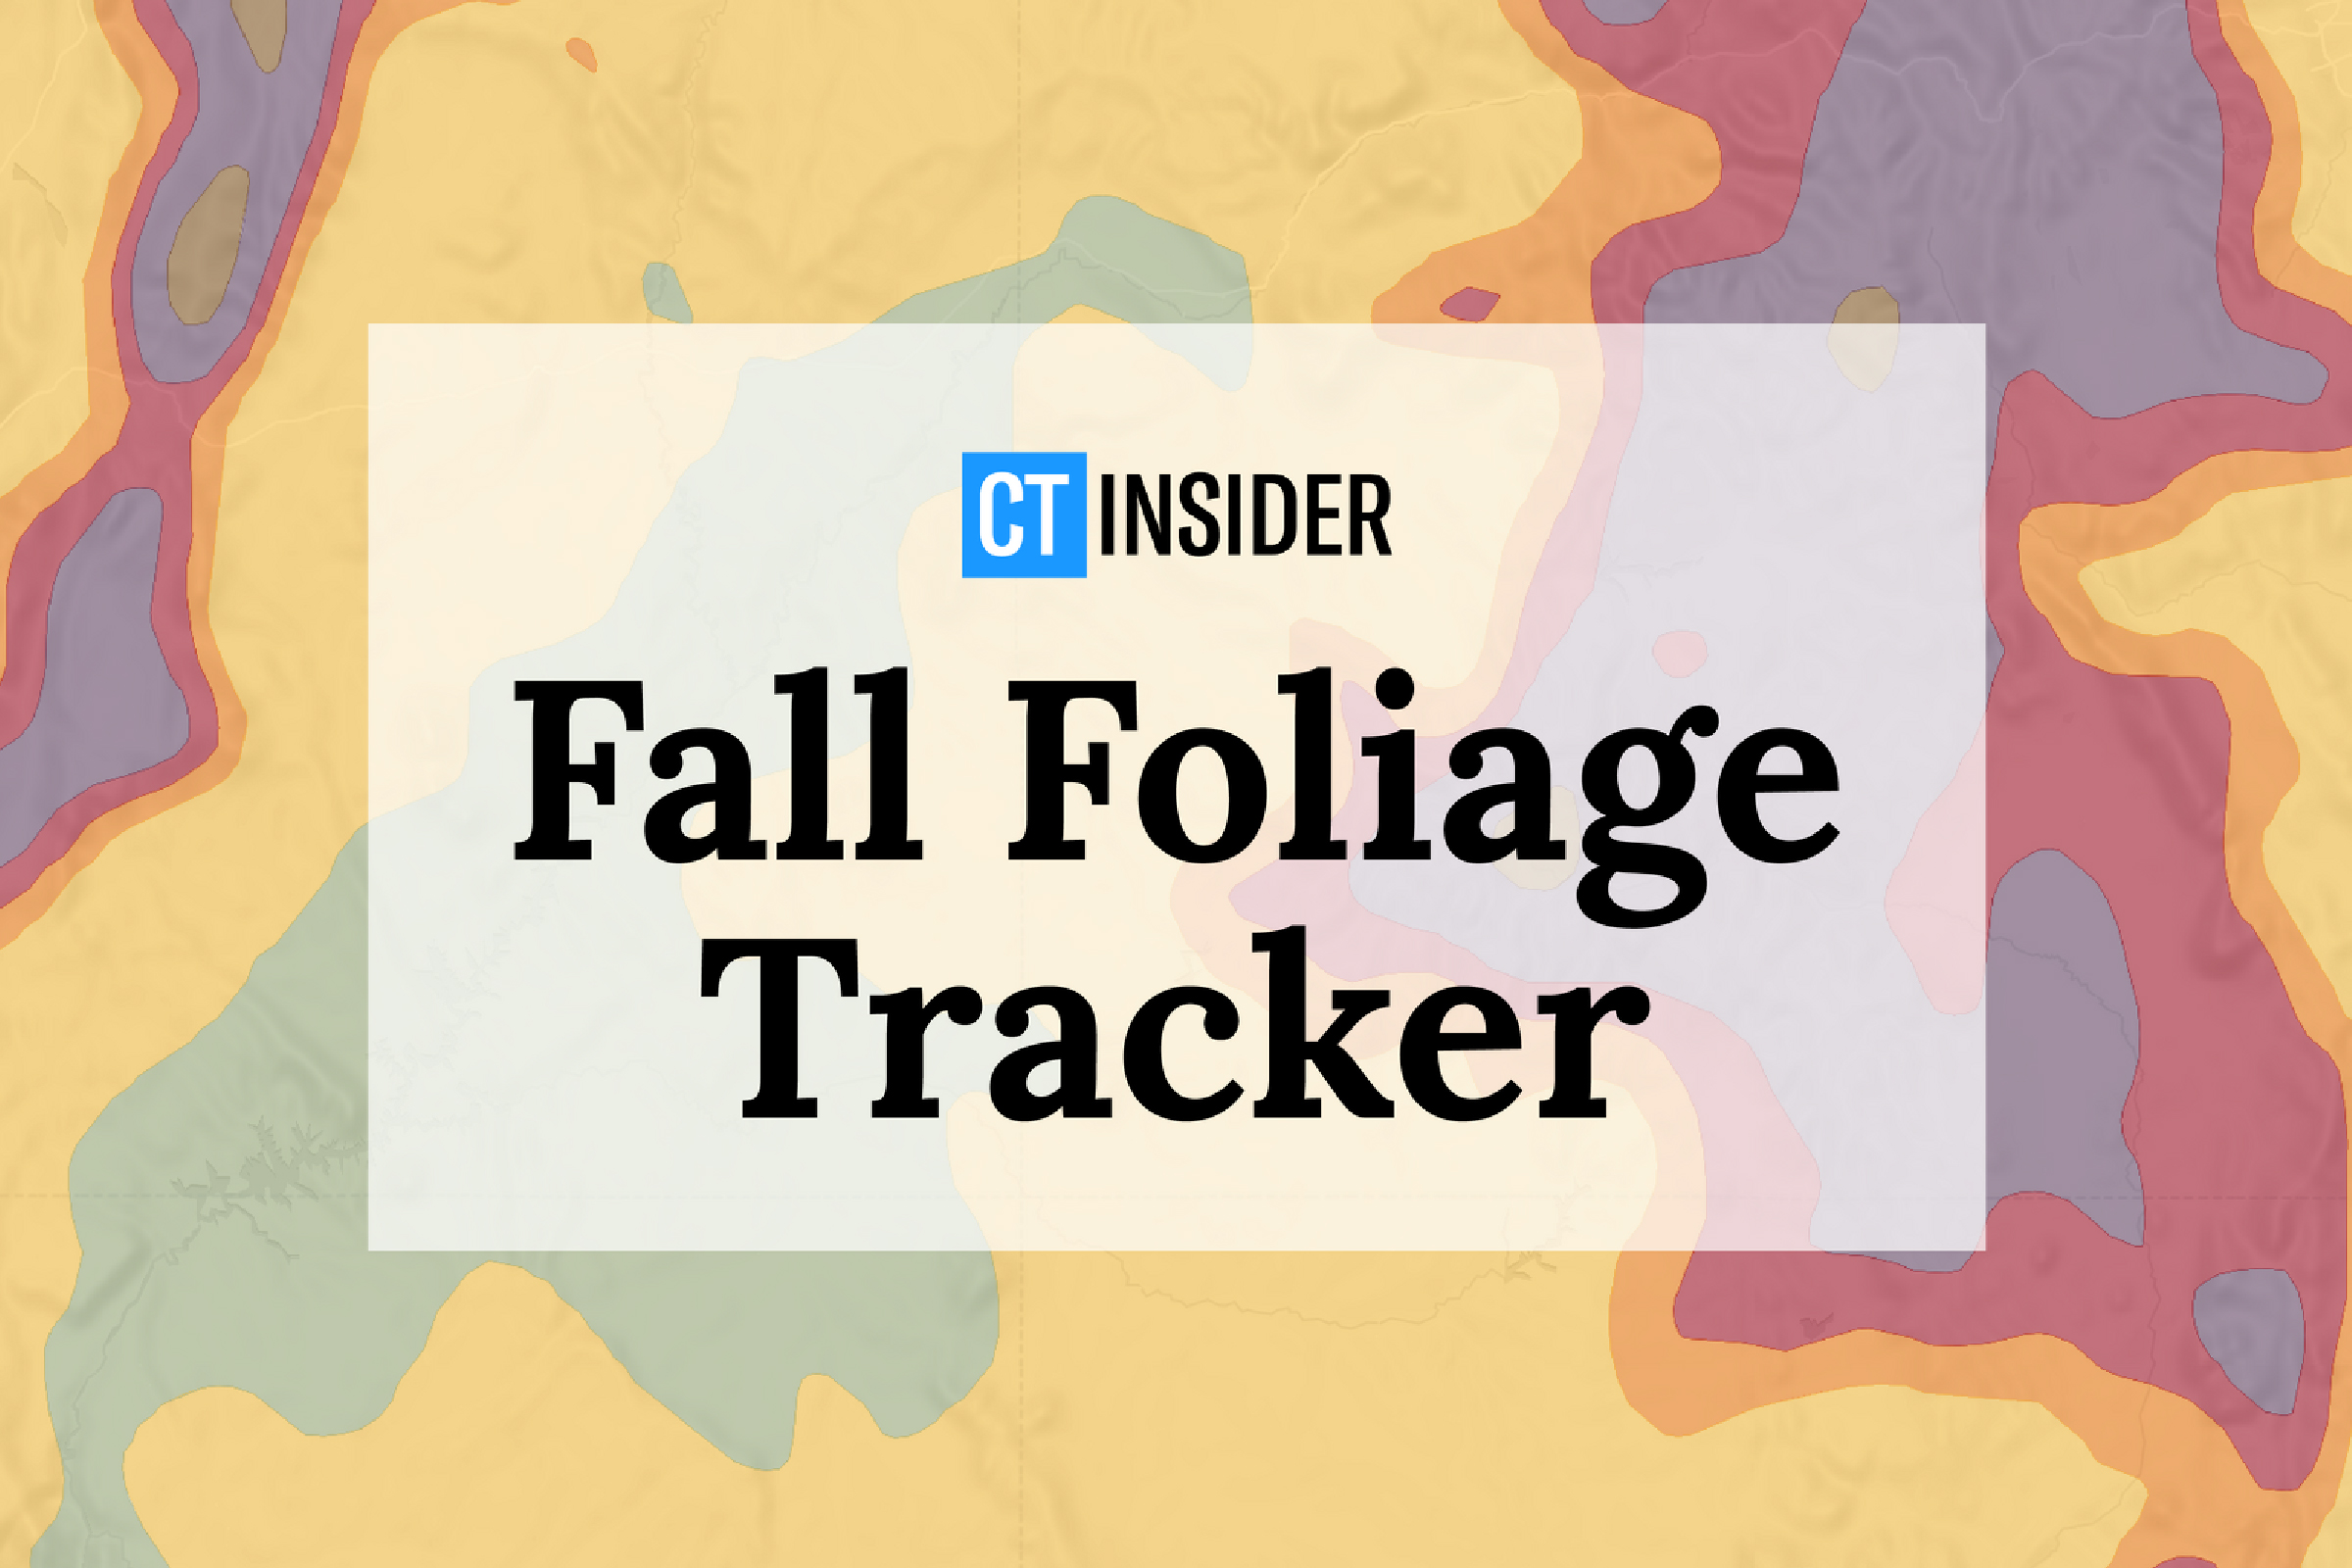 Promo image for CT Insider's fall foliage tracker.